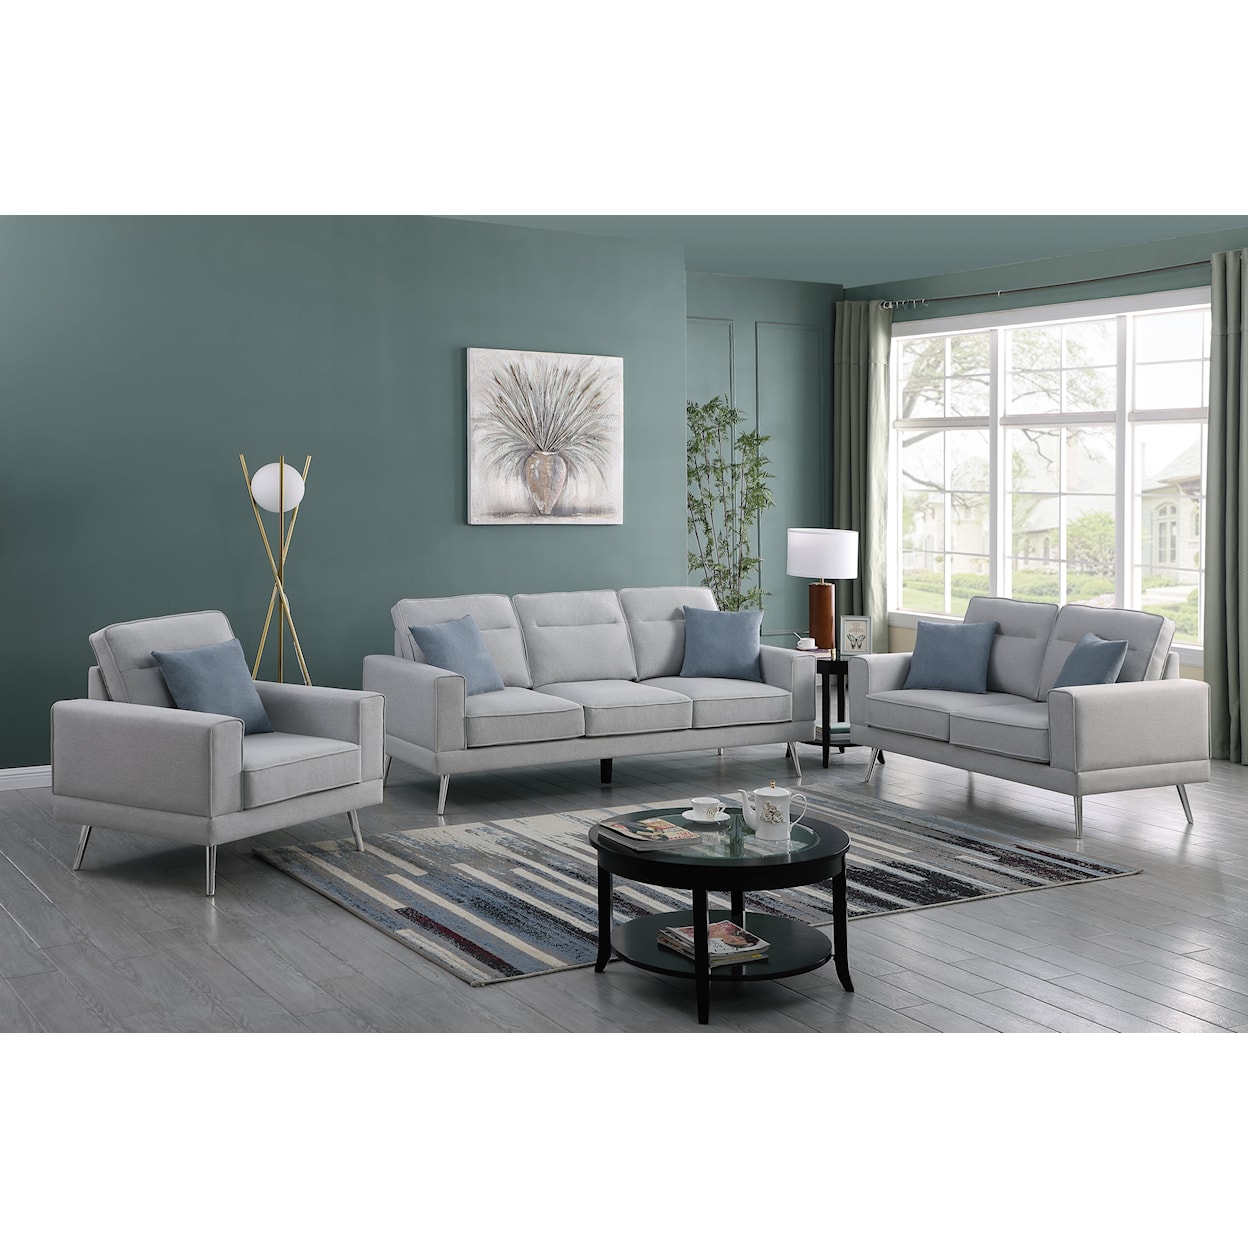 New Classic Furniture Brentwood Loveseat